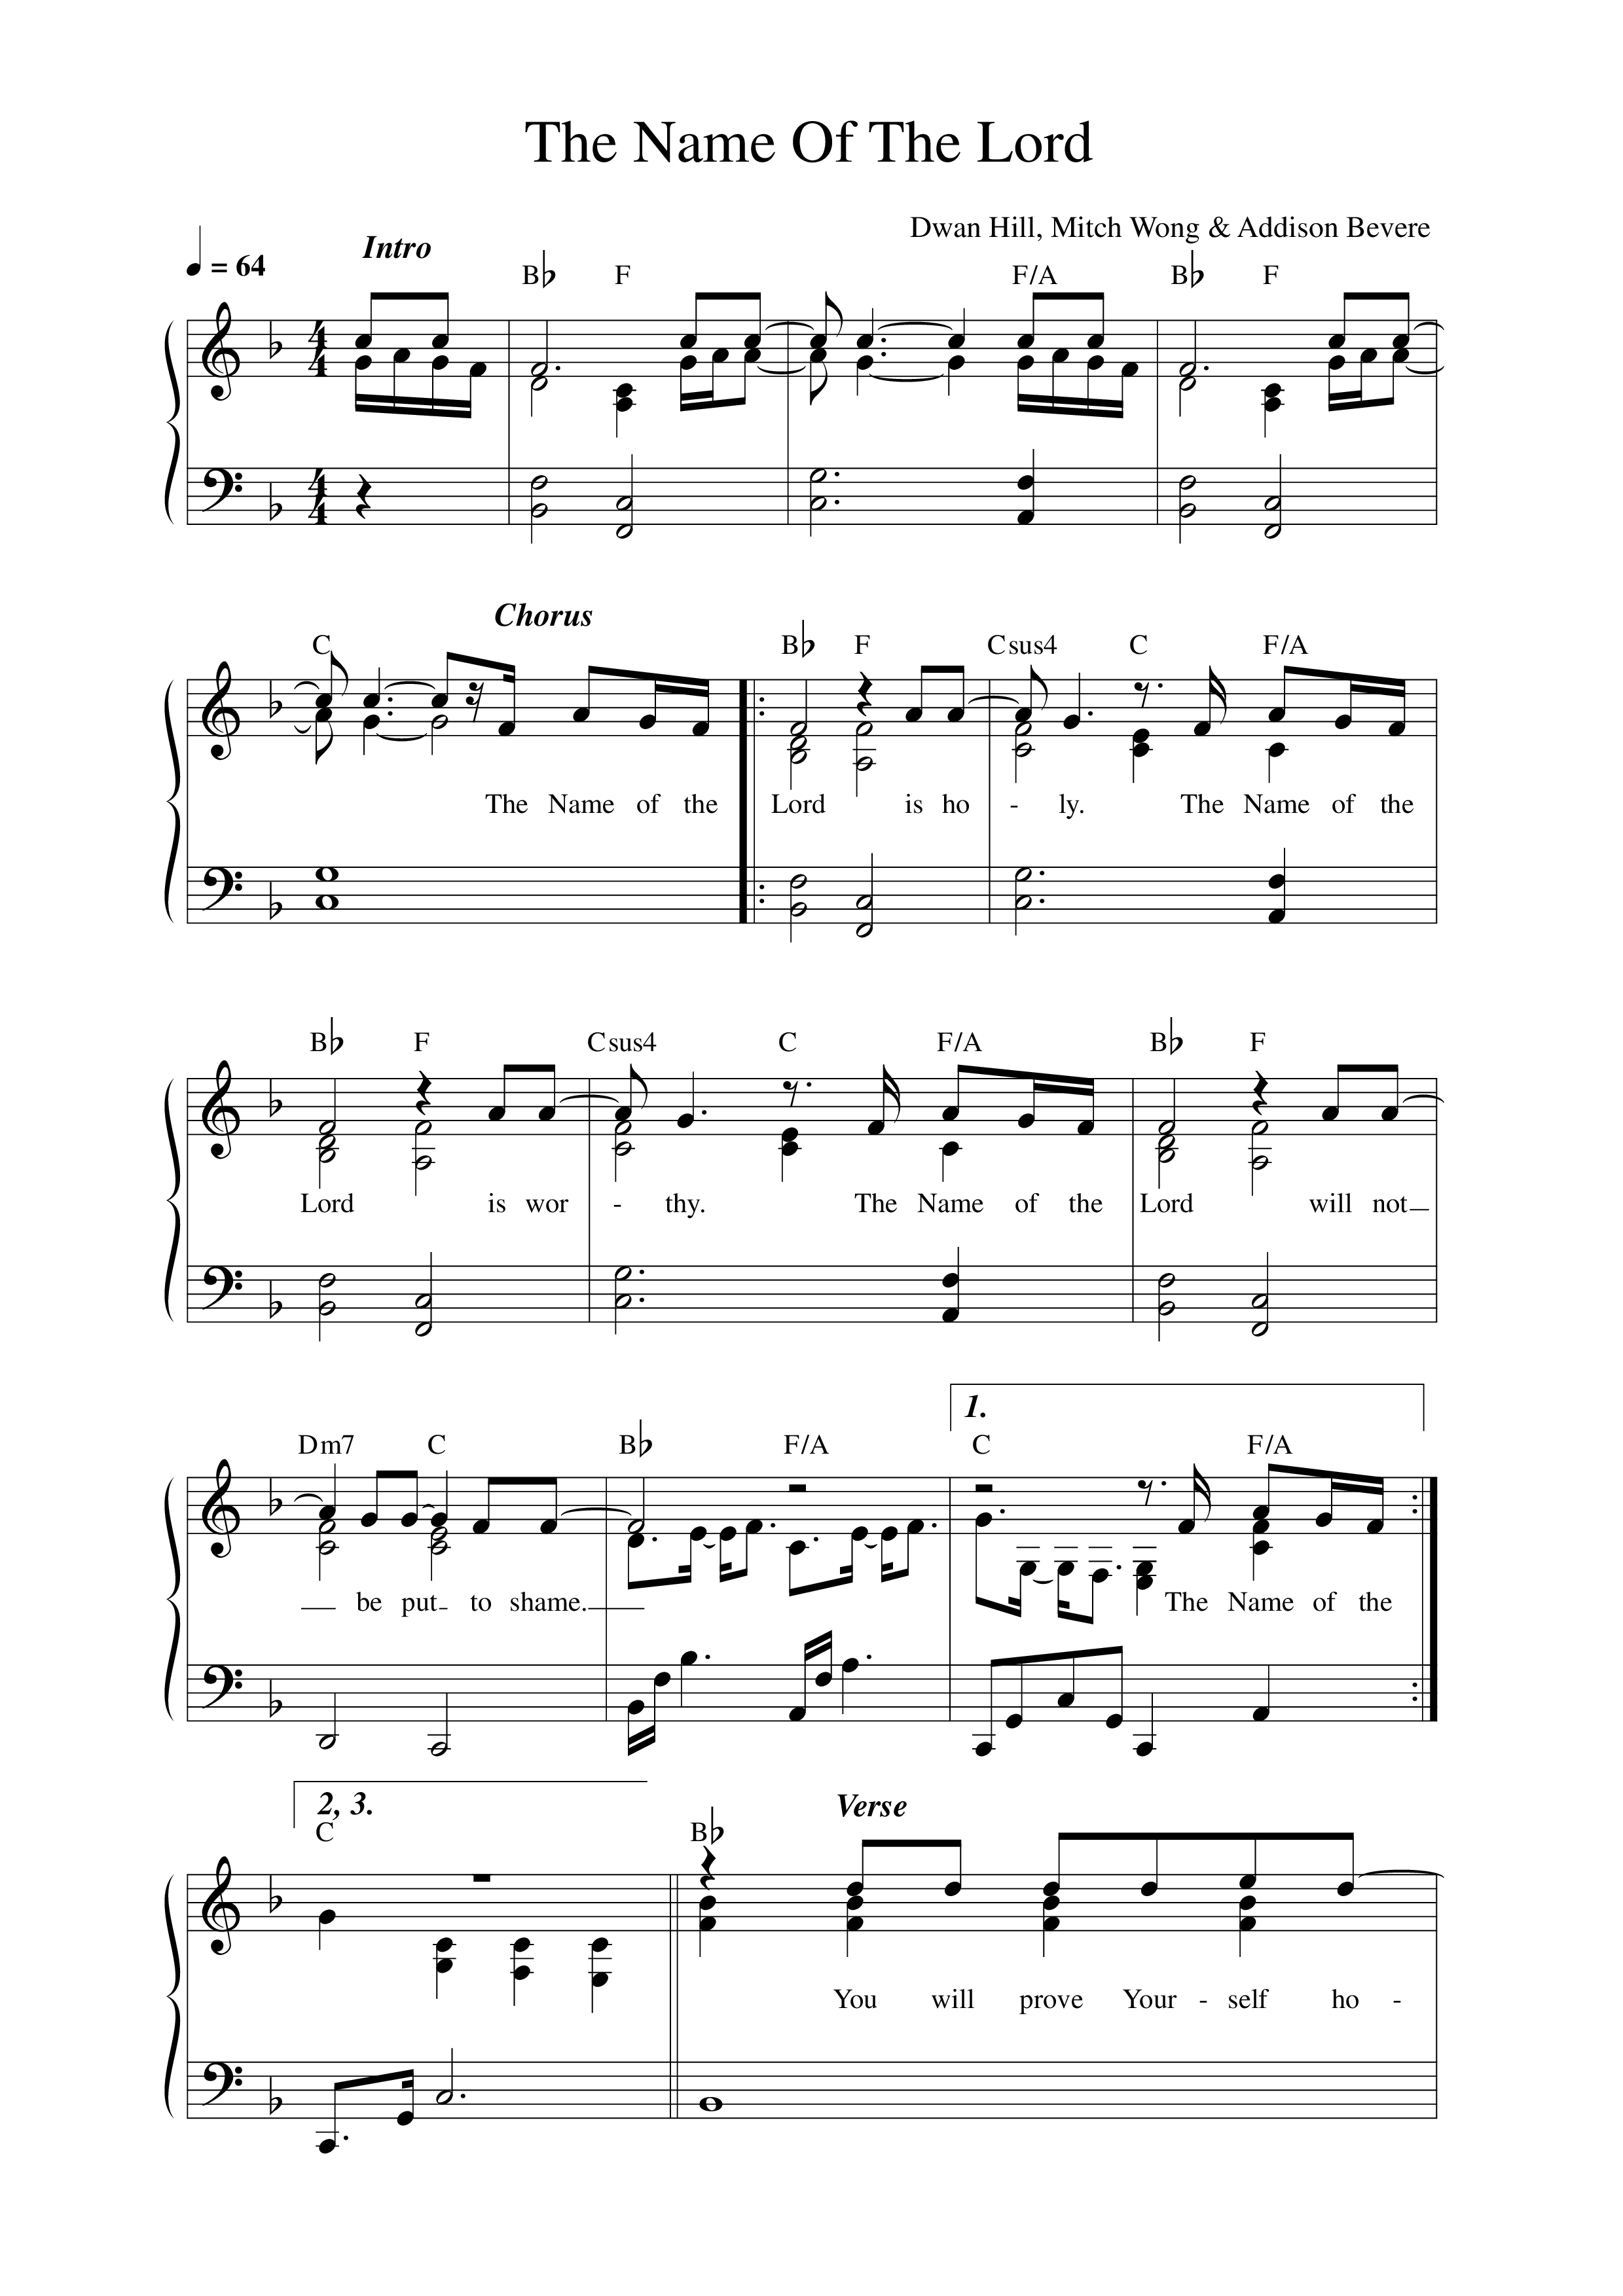 The Name Of The Lord (REVERE Unscripted) Lead Sheet Melody (REVERE / Mitch Wong / Becca Folkes)